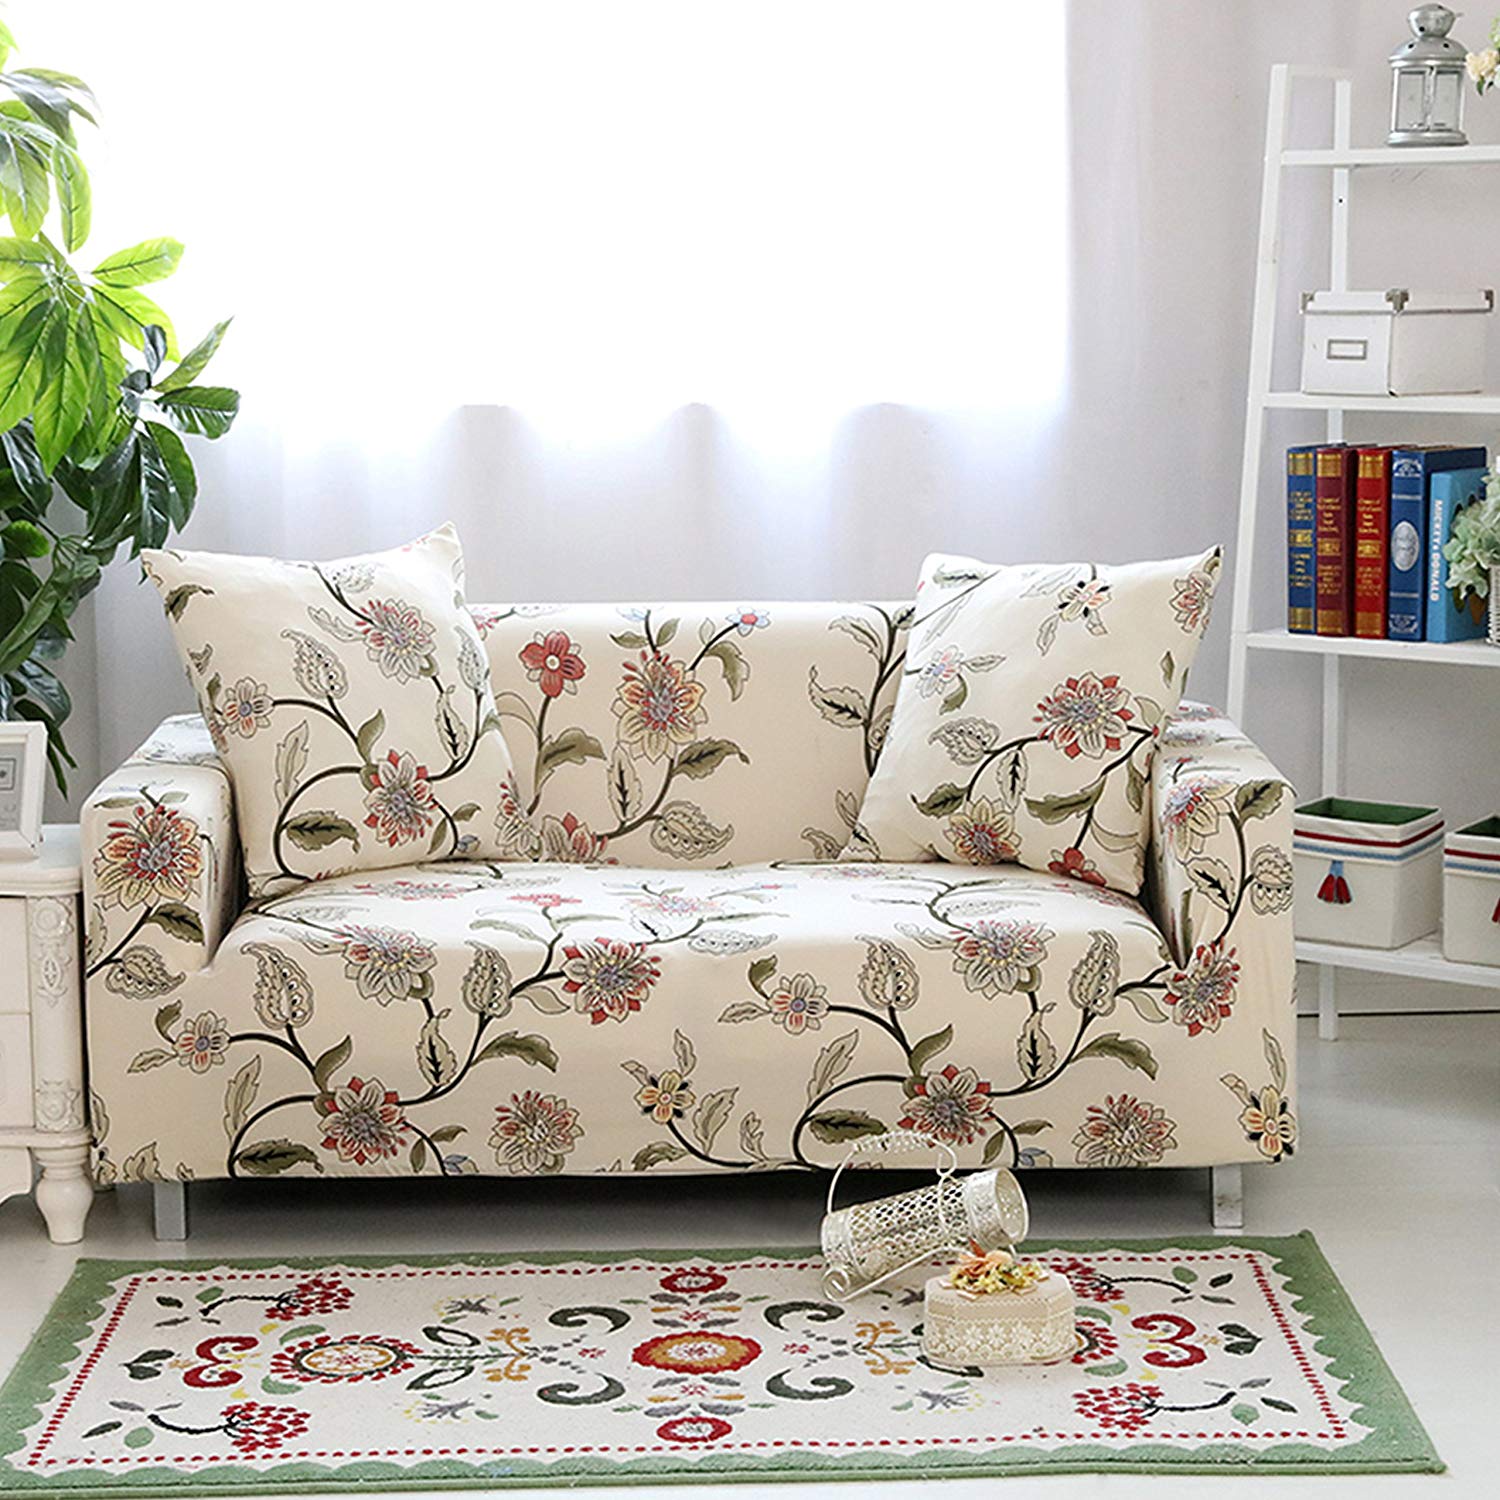 Traveller Location: Lamberia Printed Sofa Cover Stretch Couch Cover Sofa Slipcovers  for 3 Cushion Couch with One Free Pillow Case (Blooming Flower, Sofa 3  Seater):